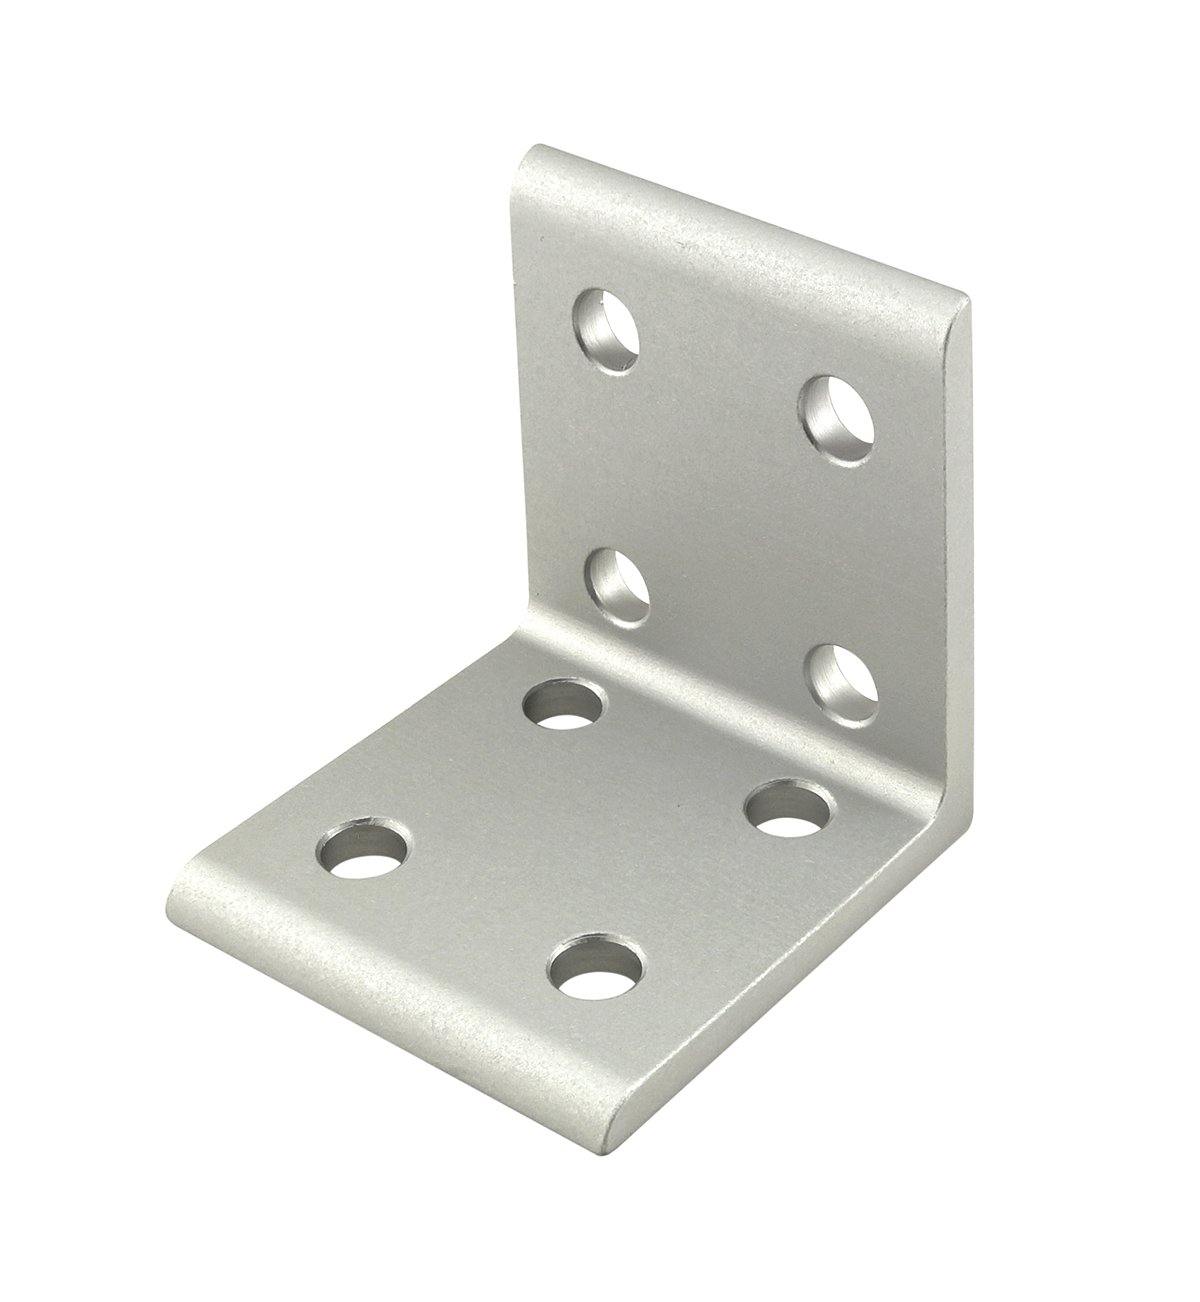 2040 Inside Corner Brackets 8 hole 20 series - Pack of 1 - Extrusion and CNC